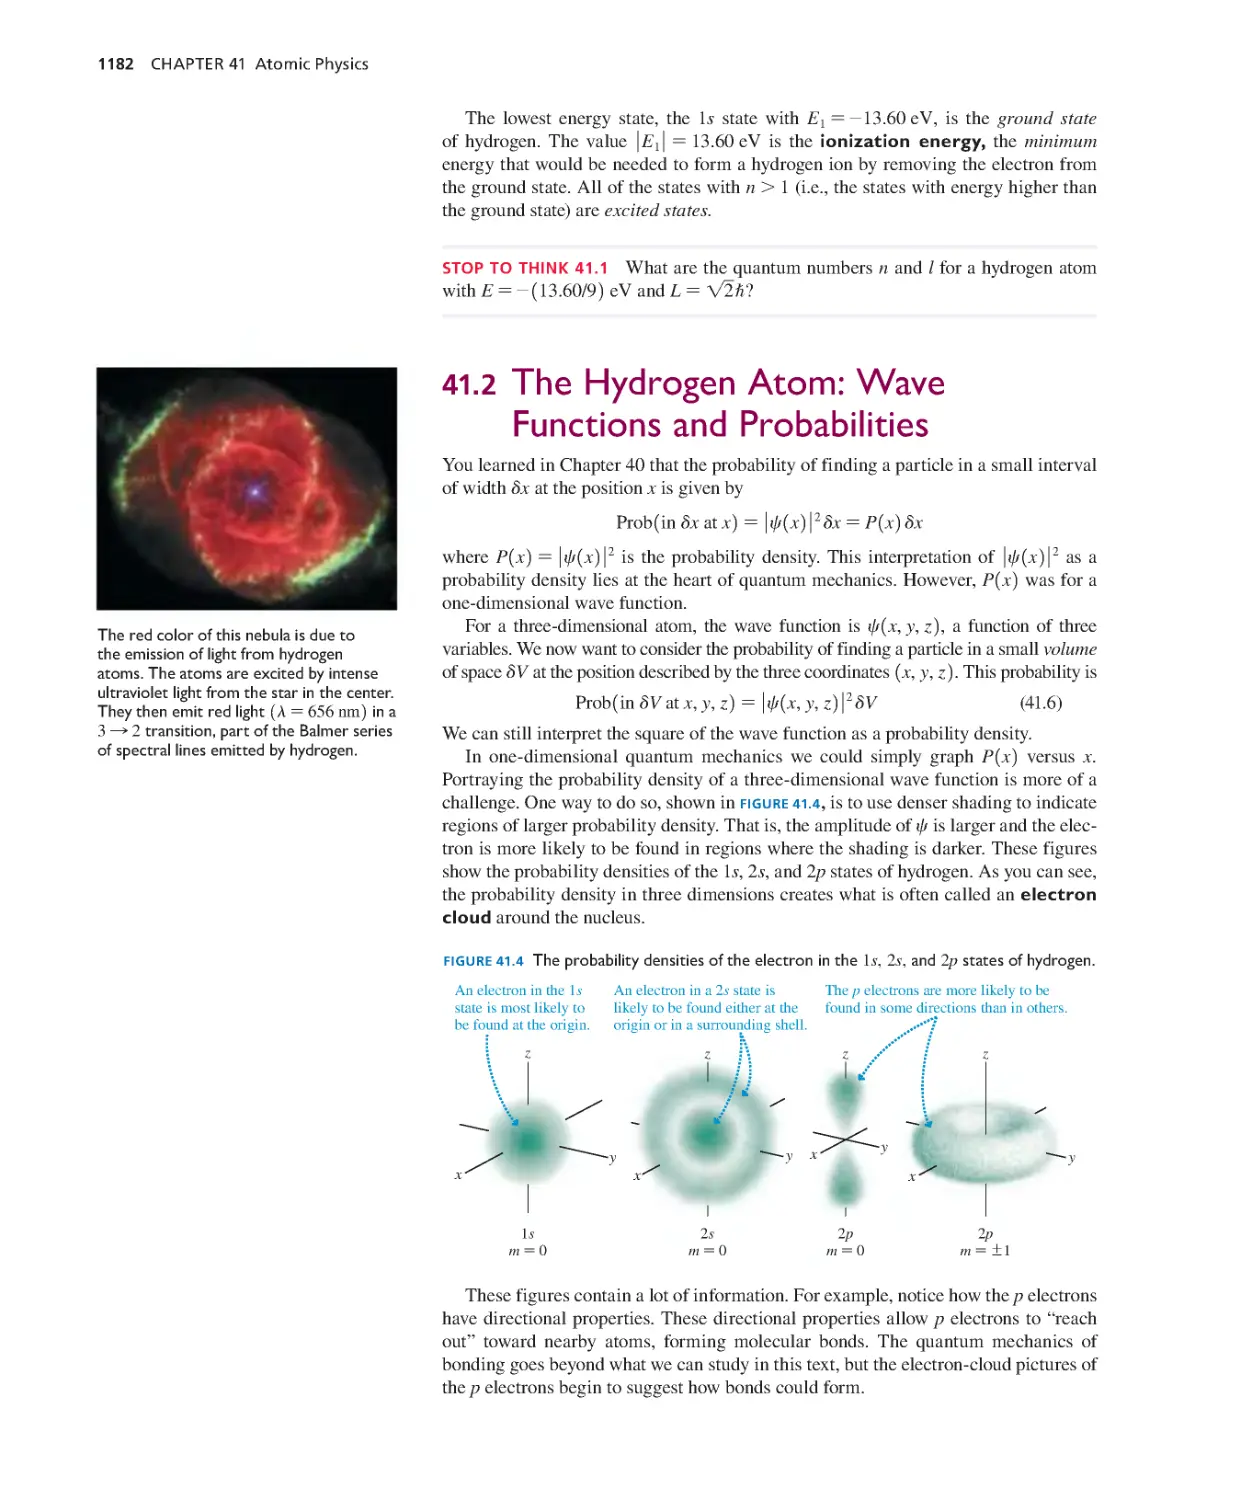 41.2. The Hydrogen Atom: Wave Functions and Probabilities